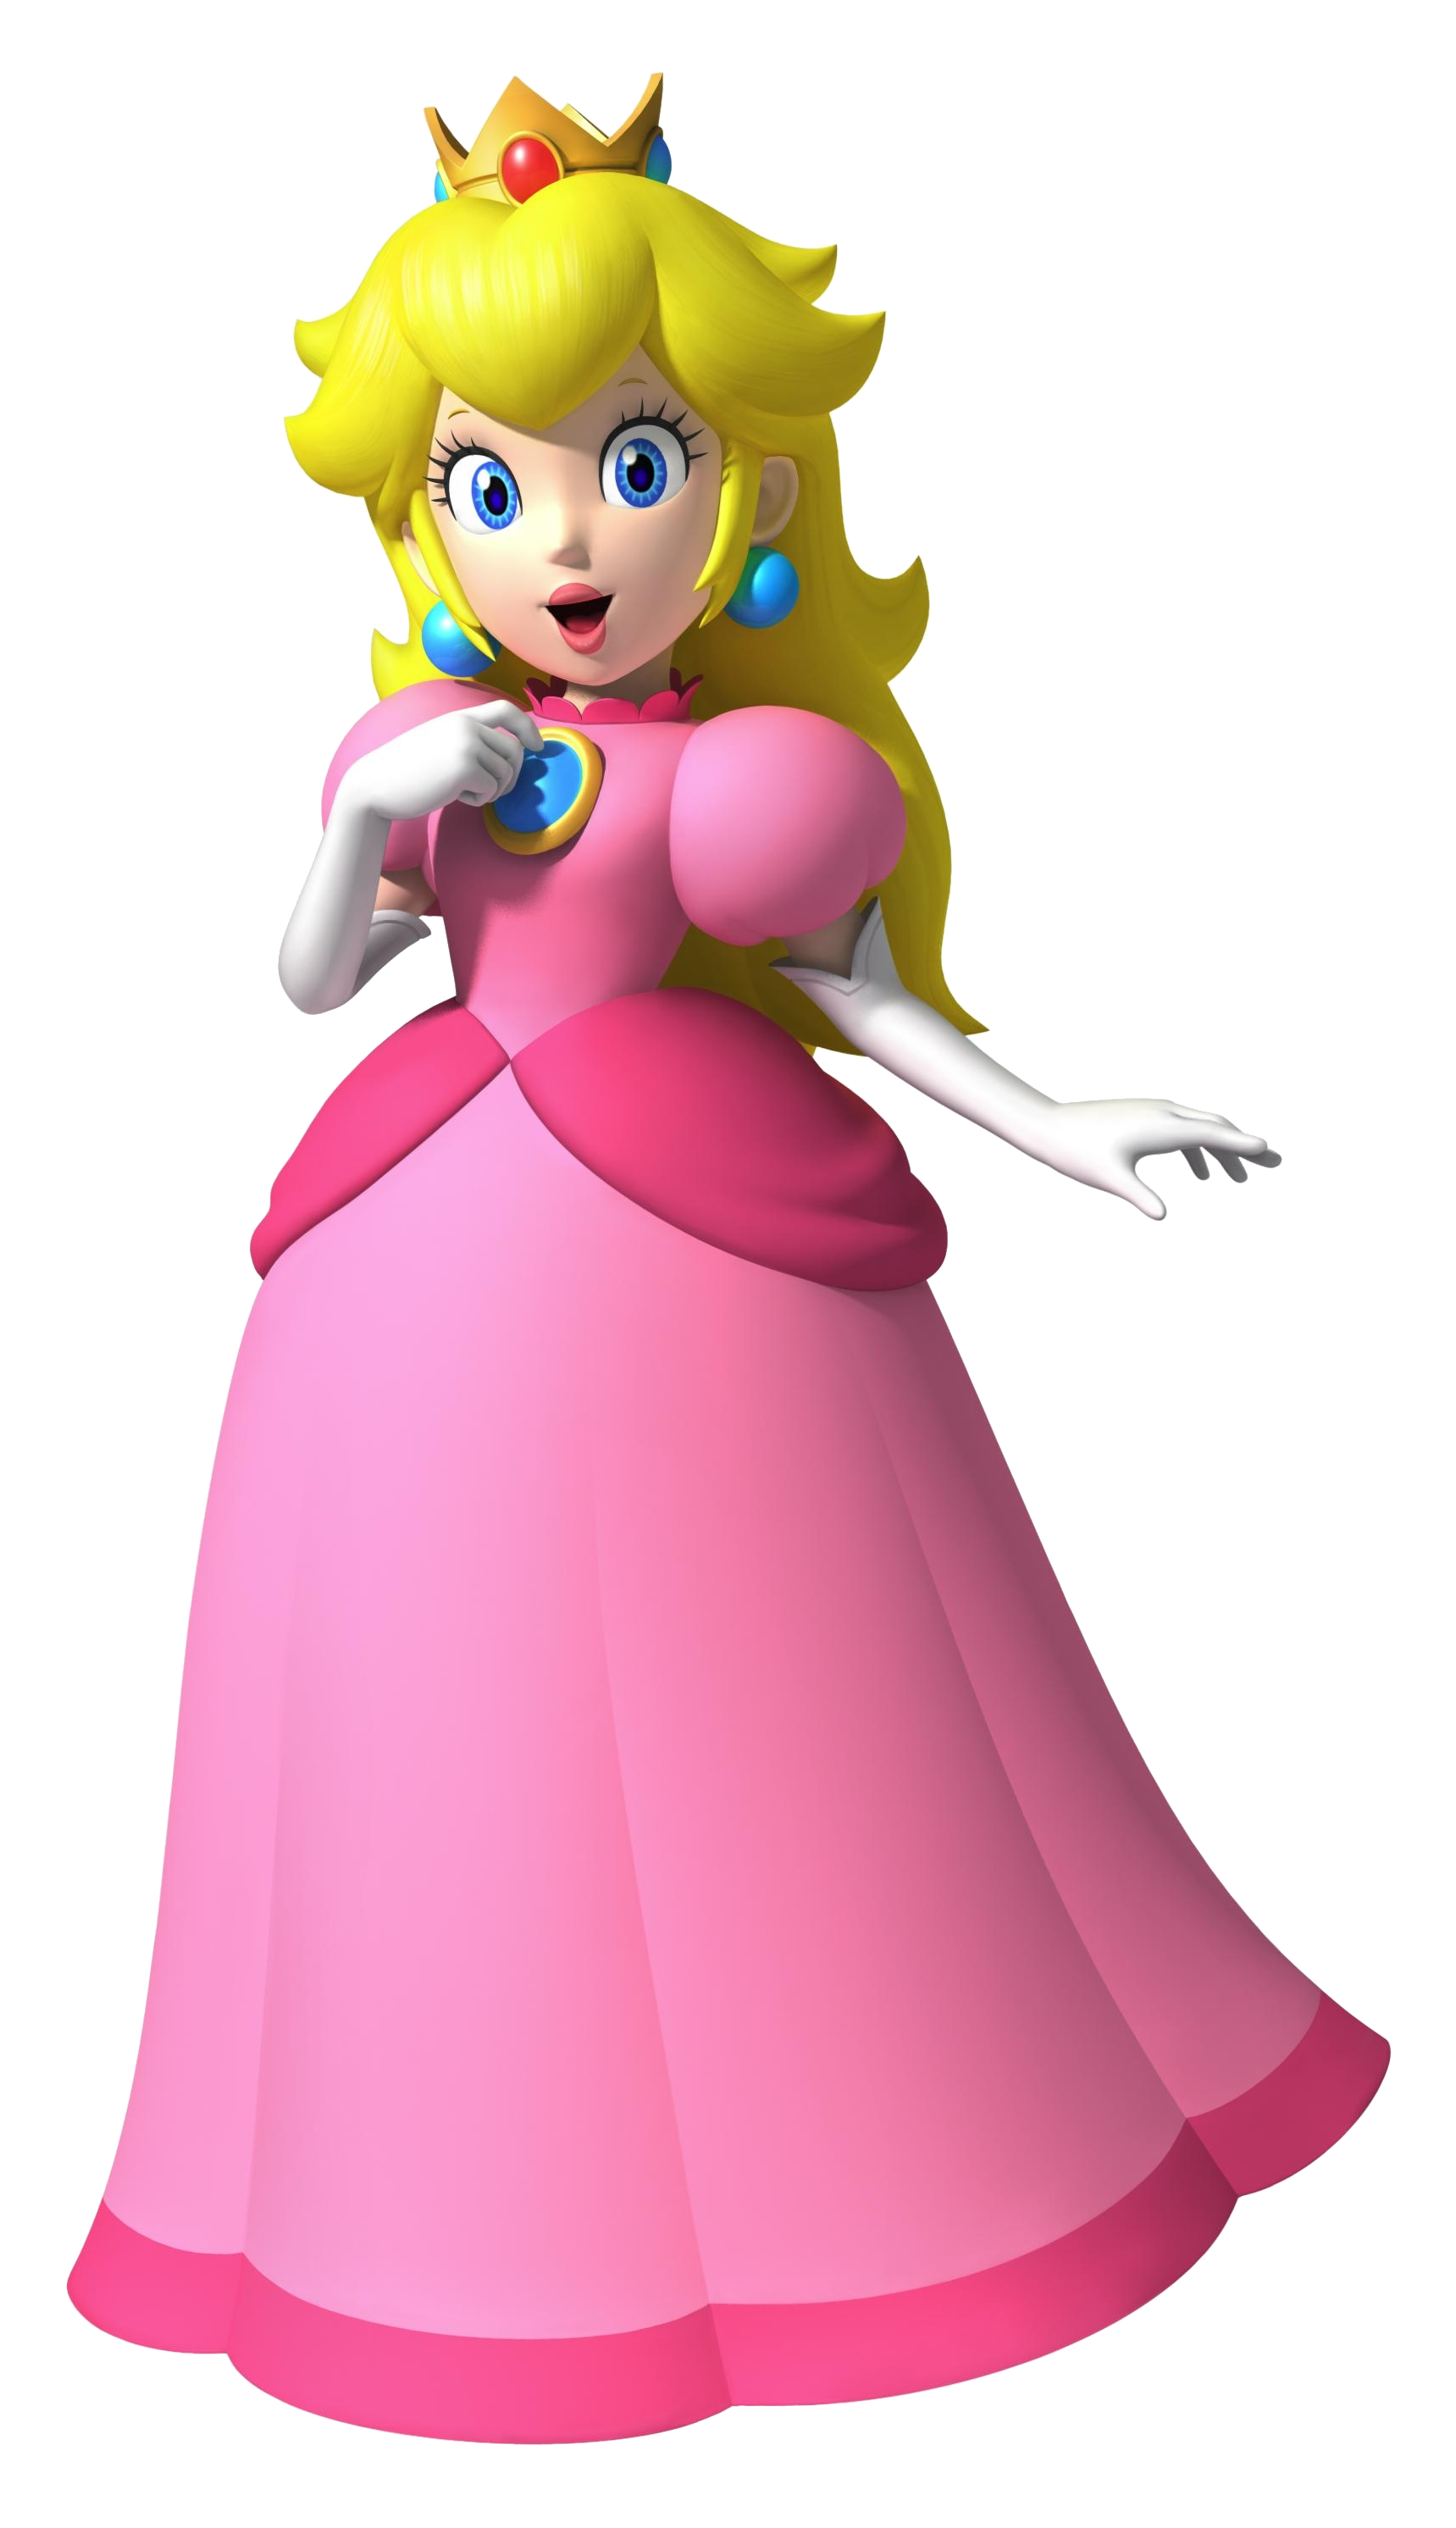 Princess Peach - Codex Gamicus - Humanity's collective gaming knowledge at  your fingertips.